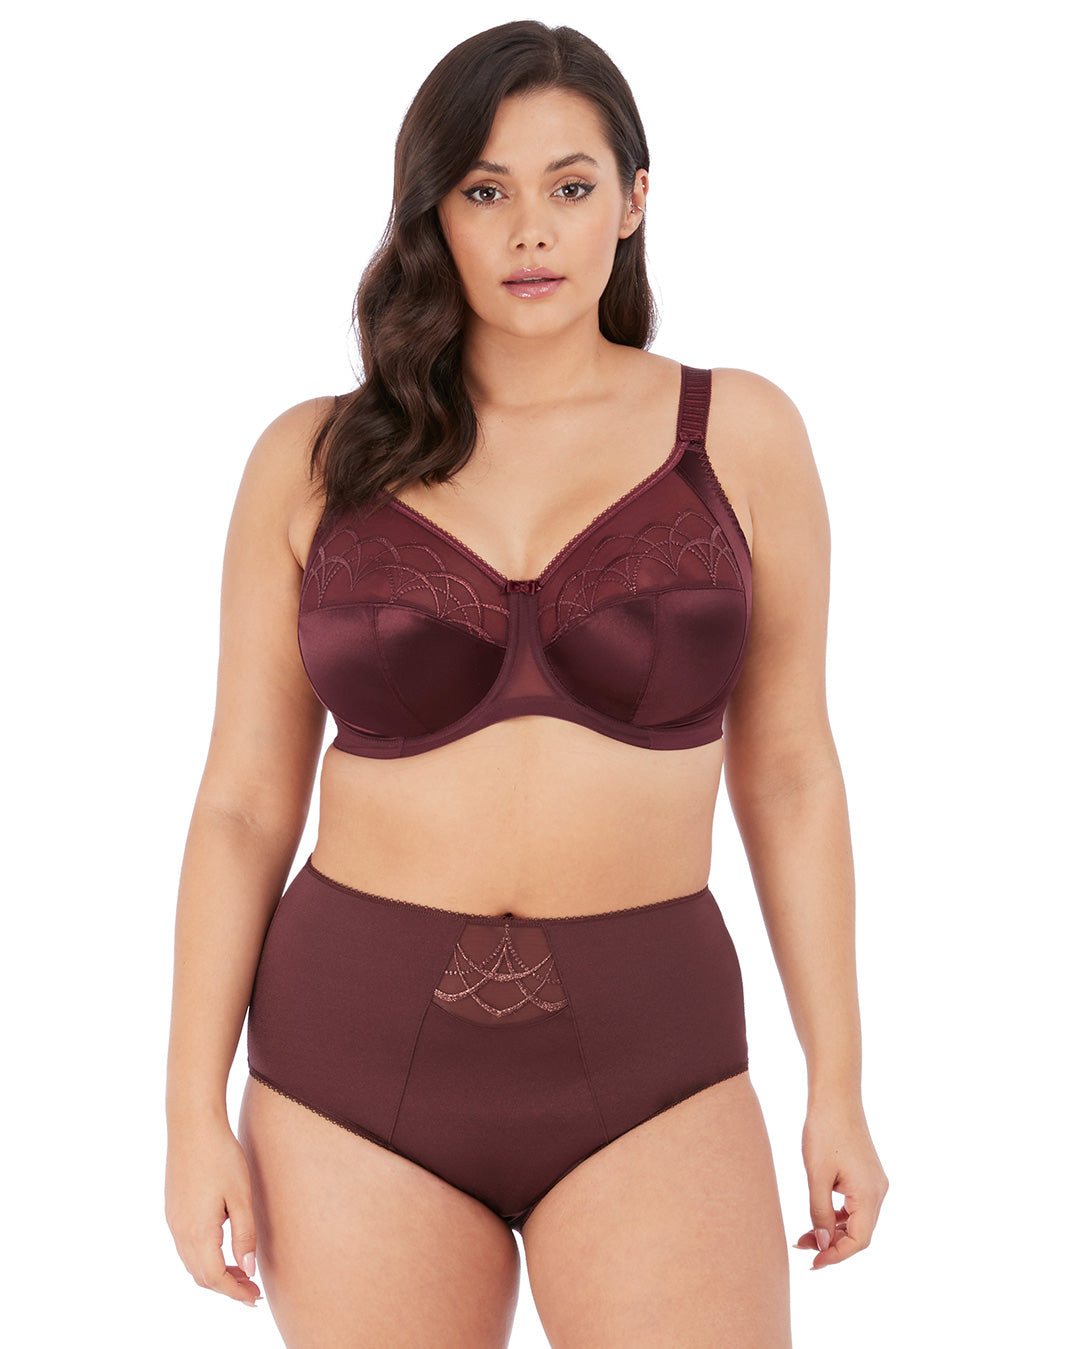 Adelaide Underwire Full Cup Bra Sand 40L